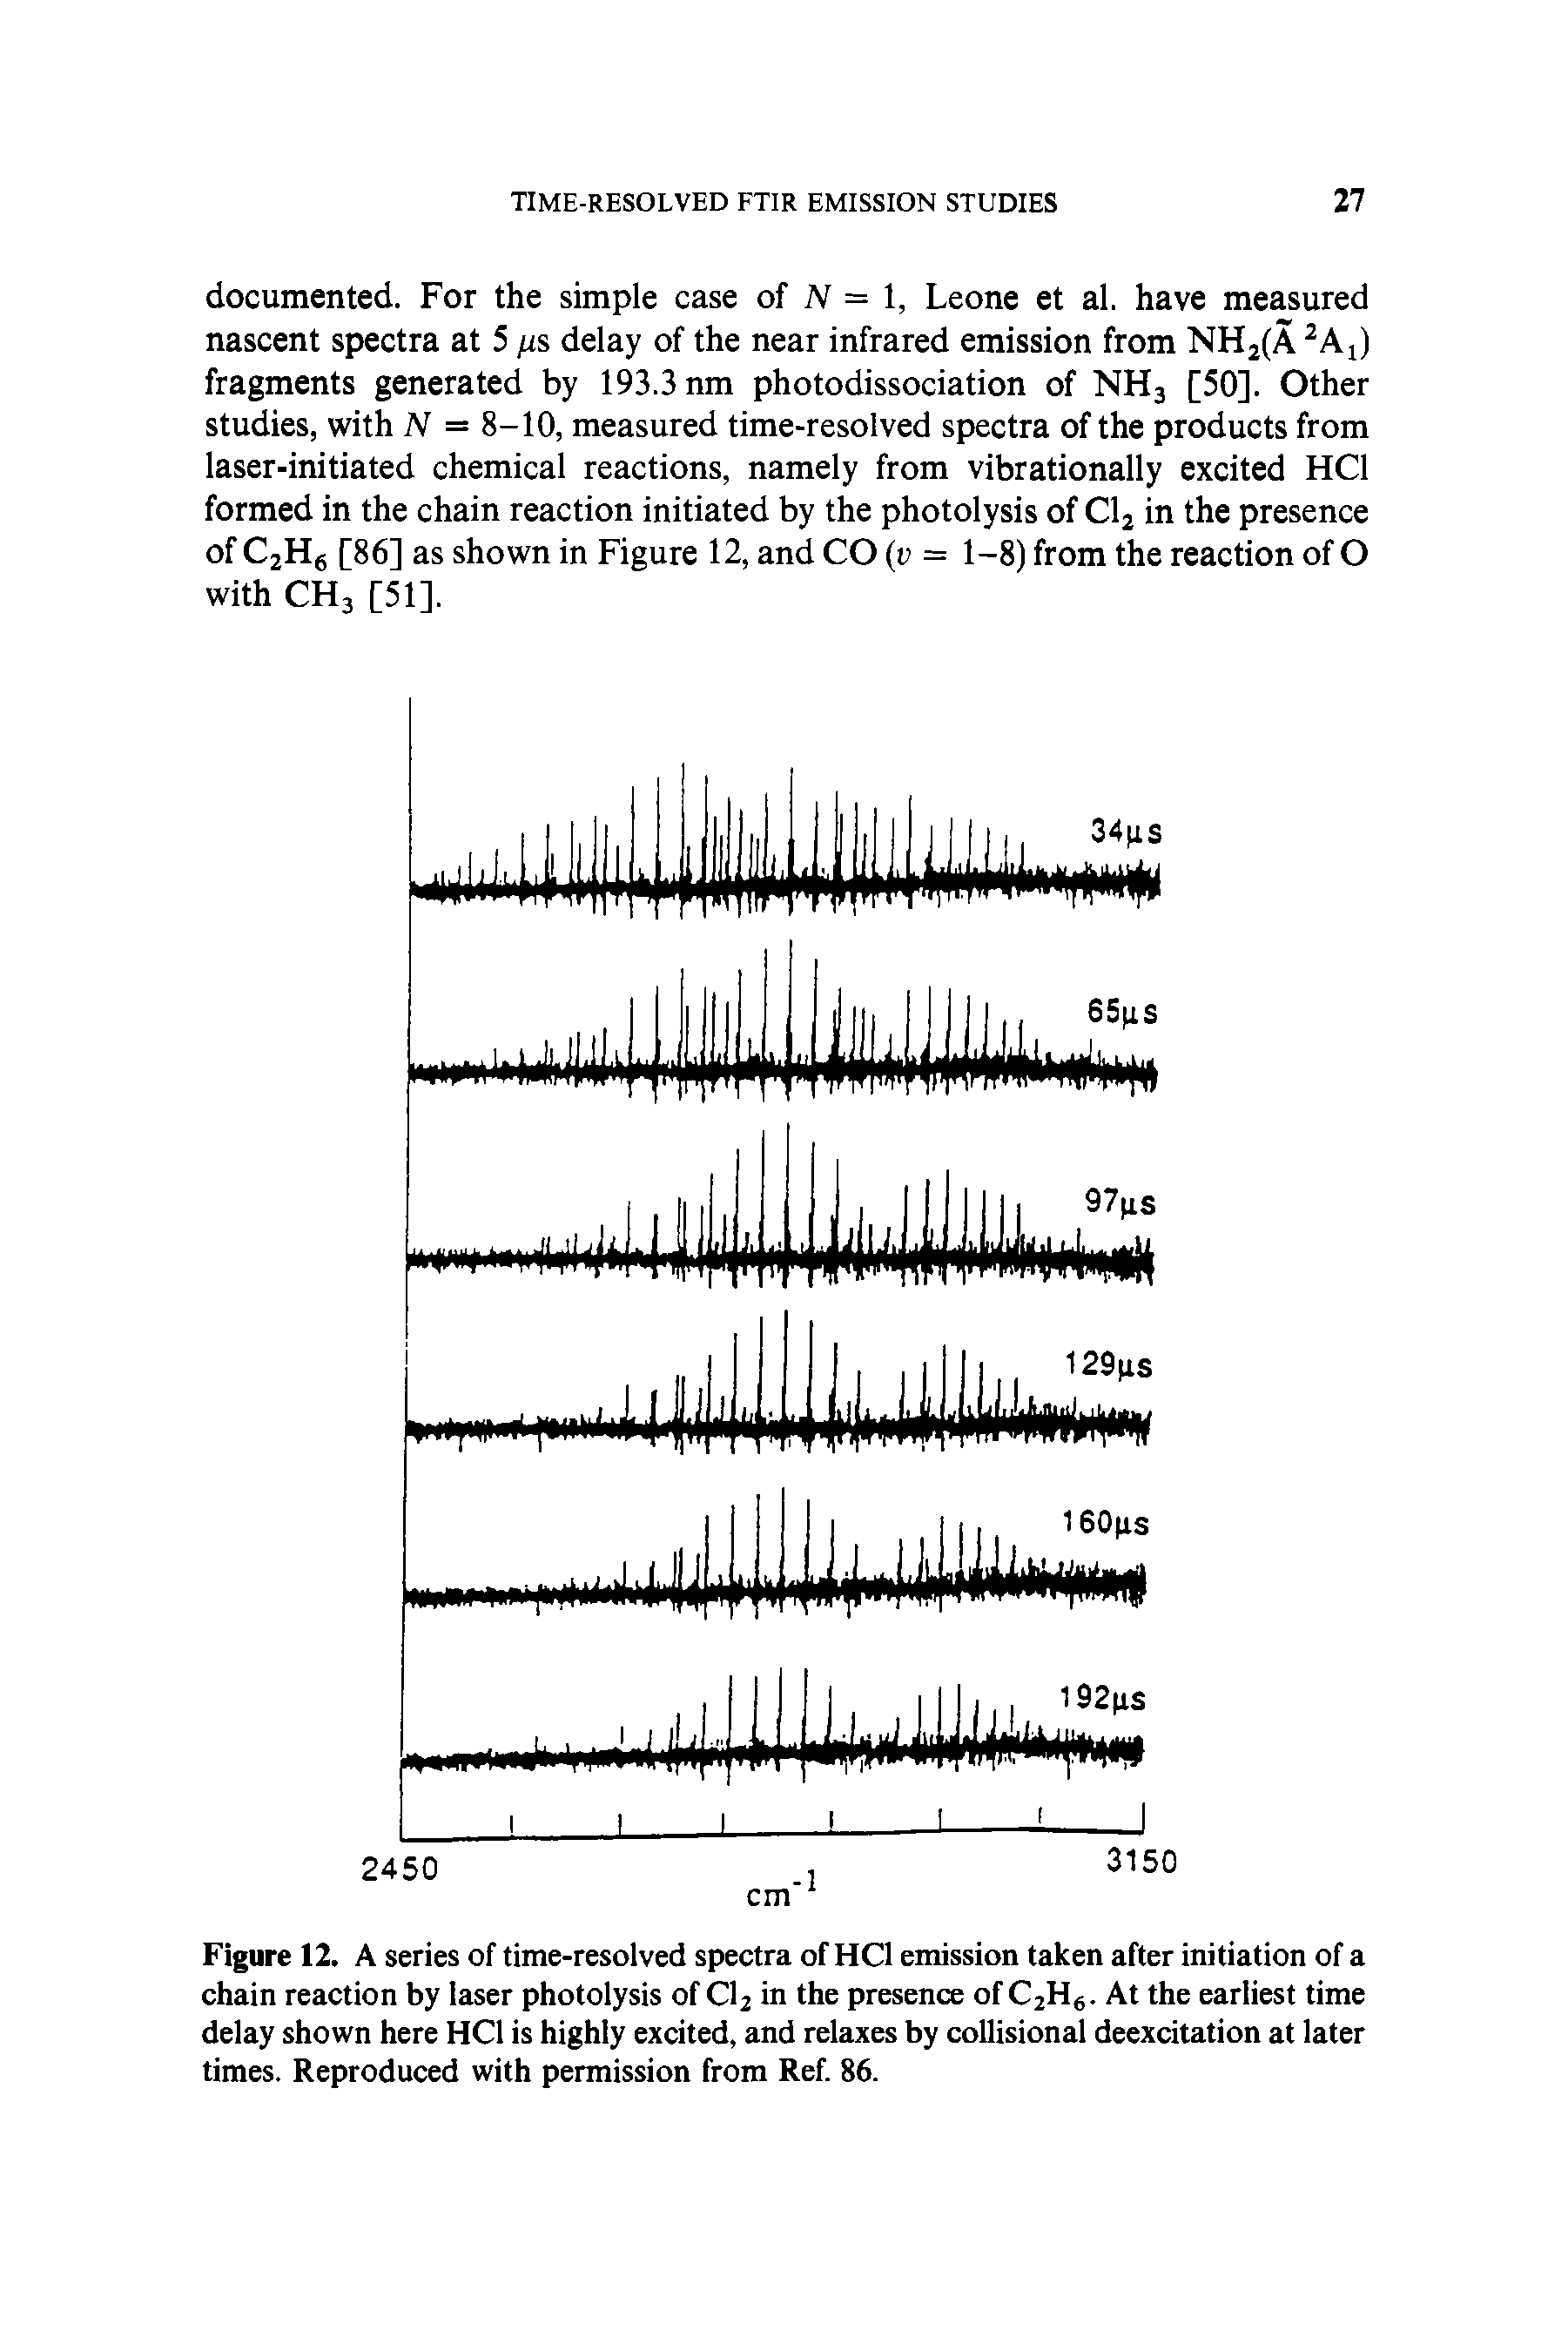 Figure 12. A series of time-resolved spectra of HC1 emission taken after initiation of a chain reaction by laser photolysis of Cl2 in the presence of C2H6. At the earliest time delay shown here HC1 is highly excited, and relaxes by collisional deexcitation at later times. Reproduced with permission from Ref. 86.